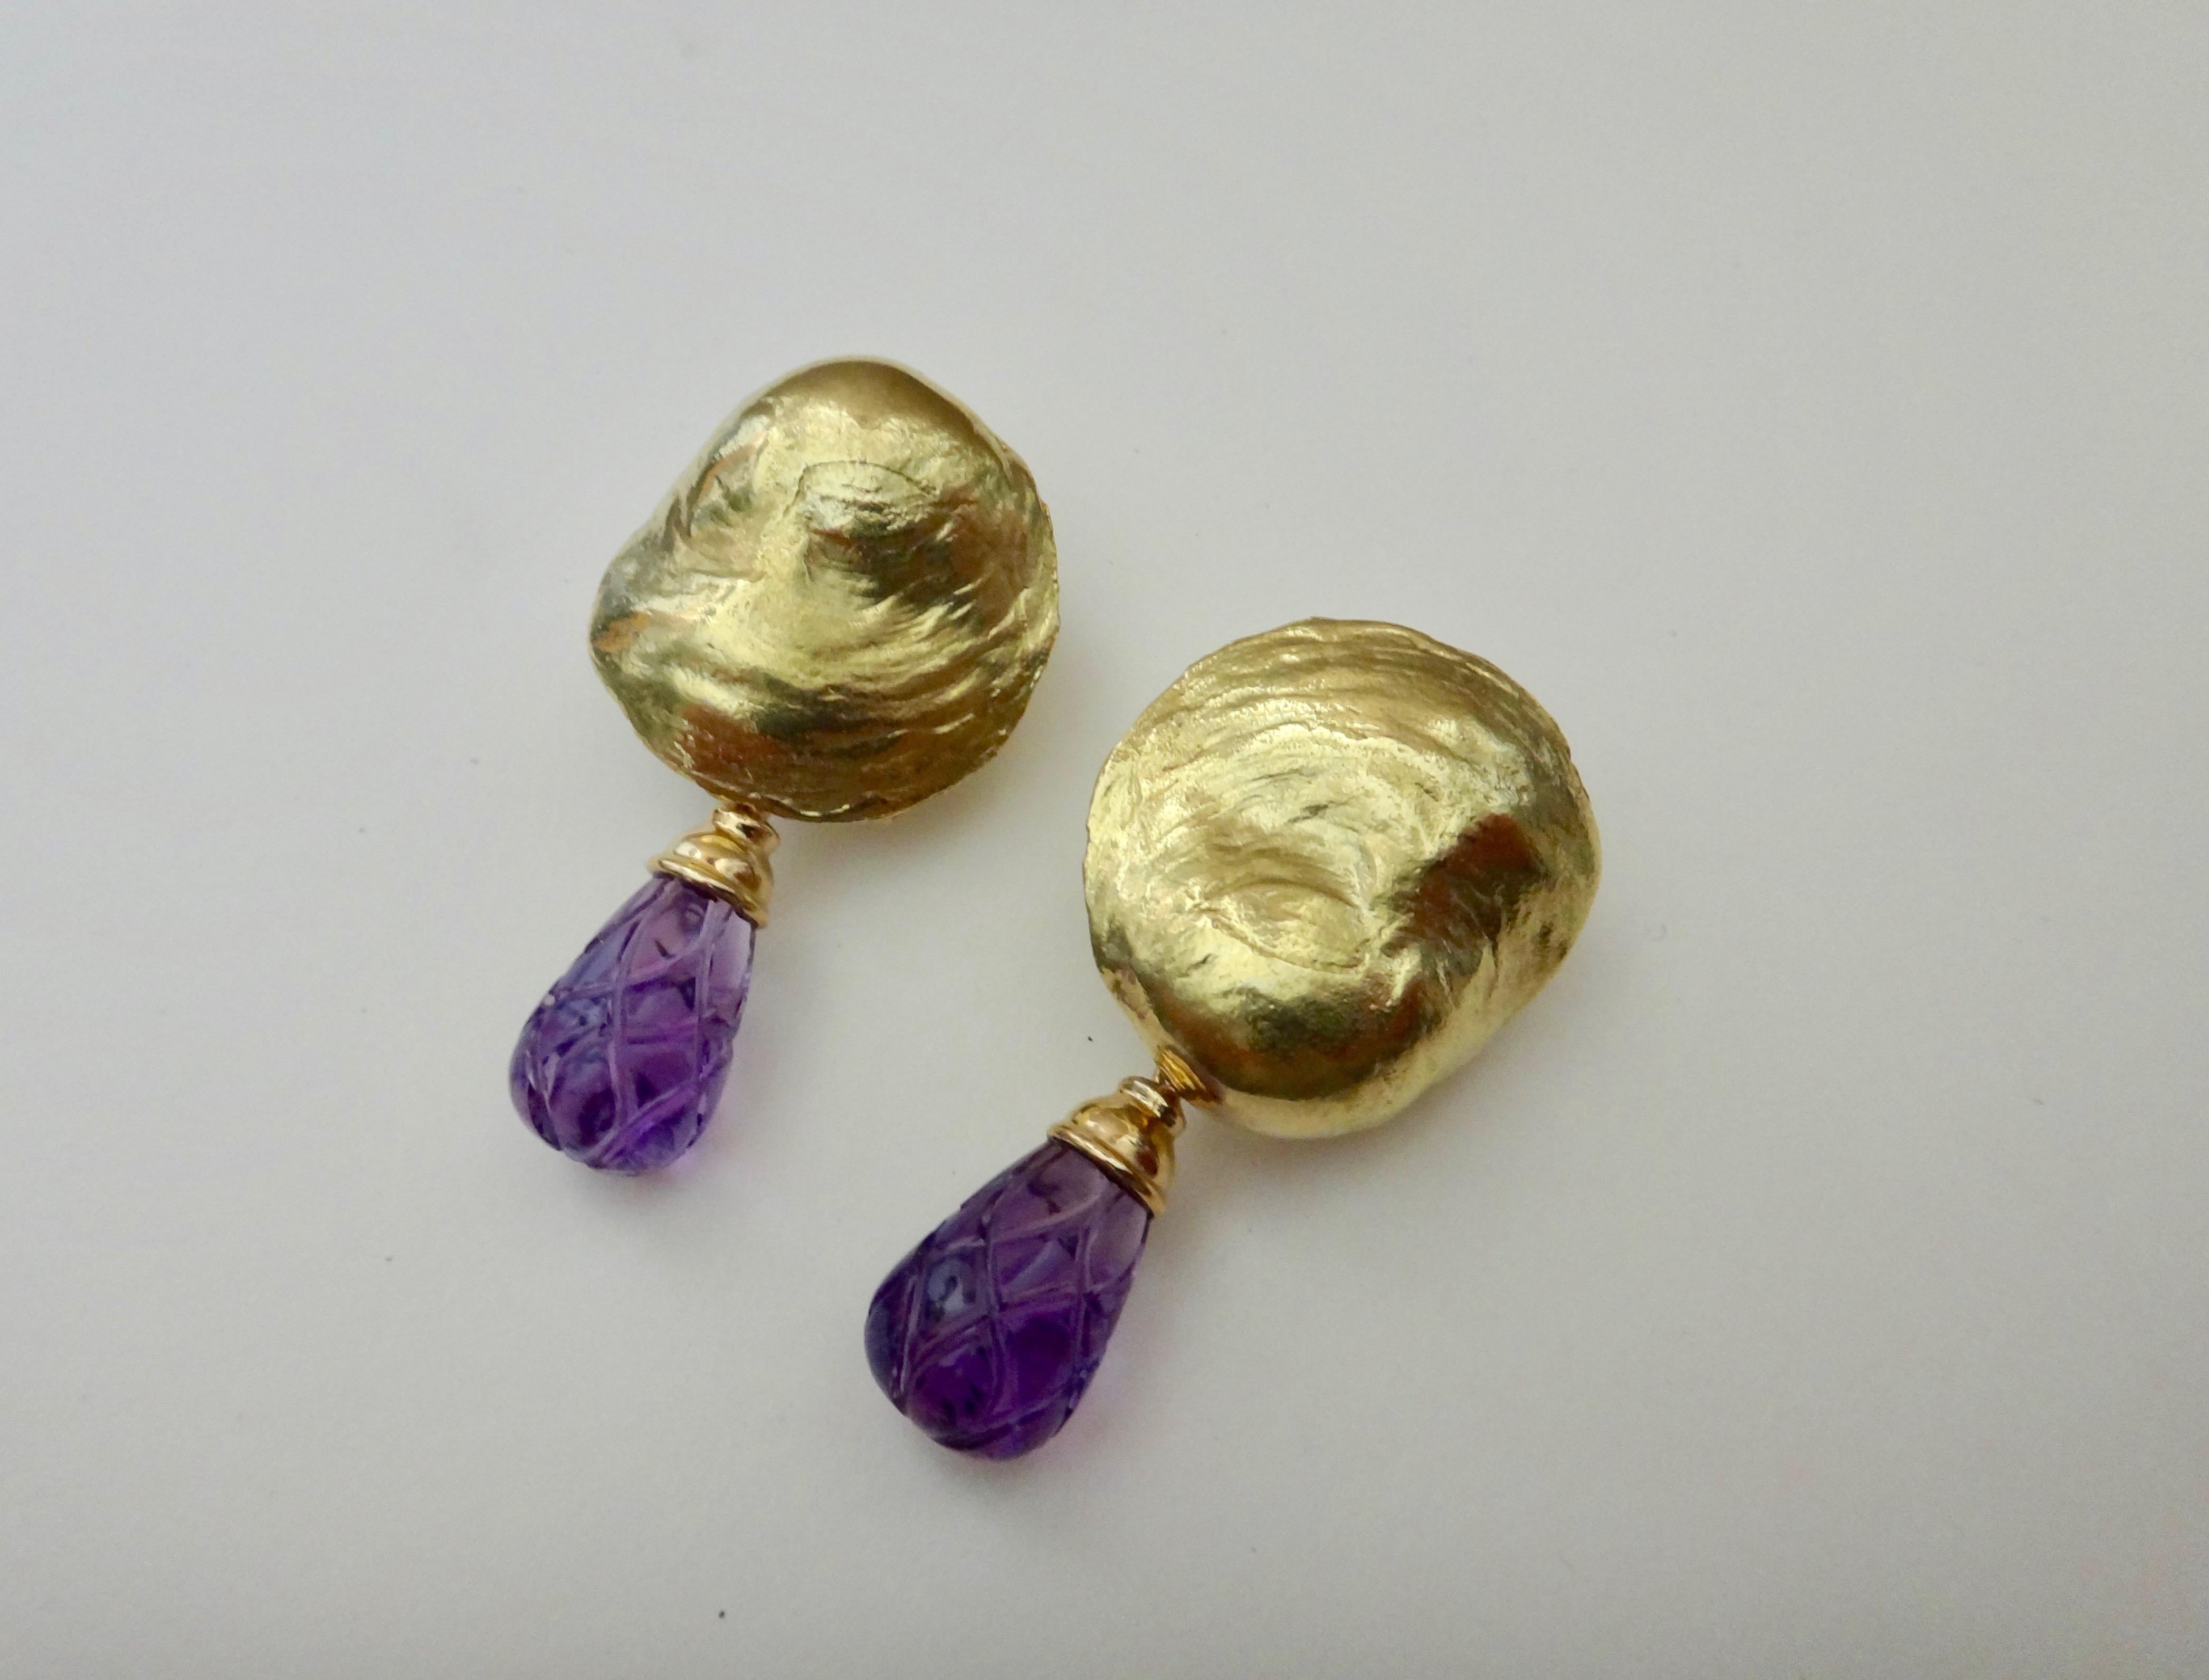 Offered are these Jingle shell earrings with removable carved amethyst drops.  